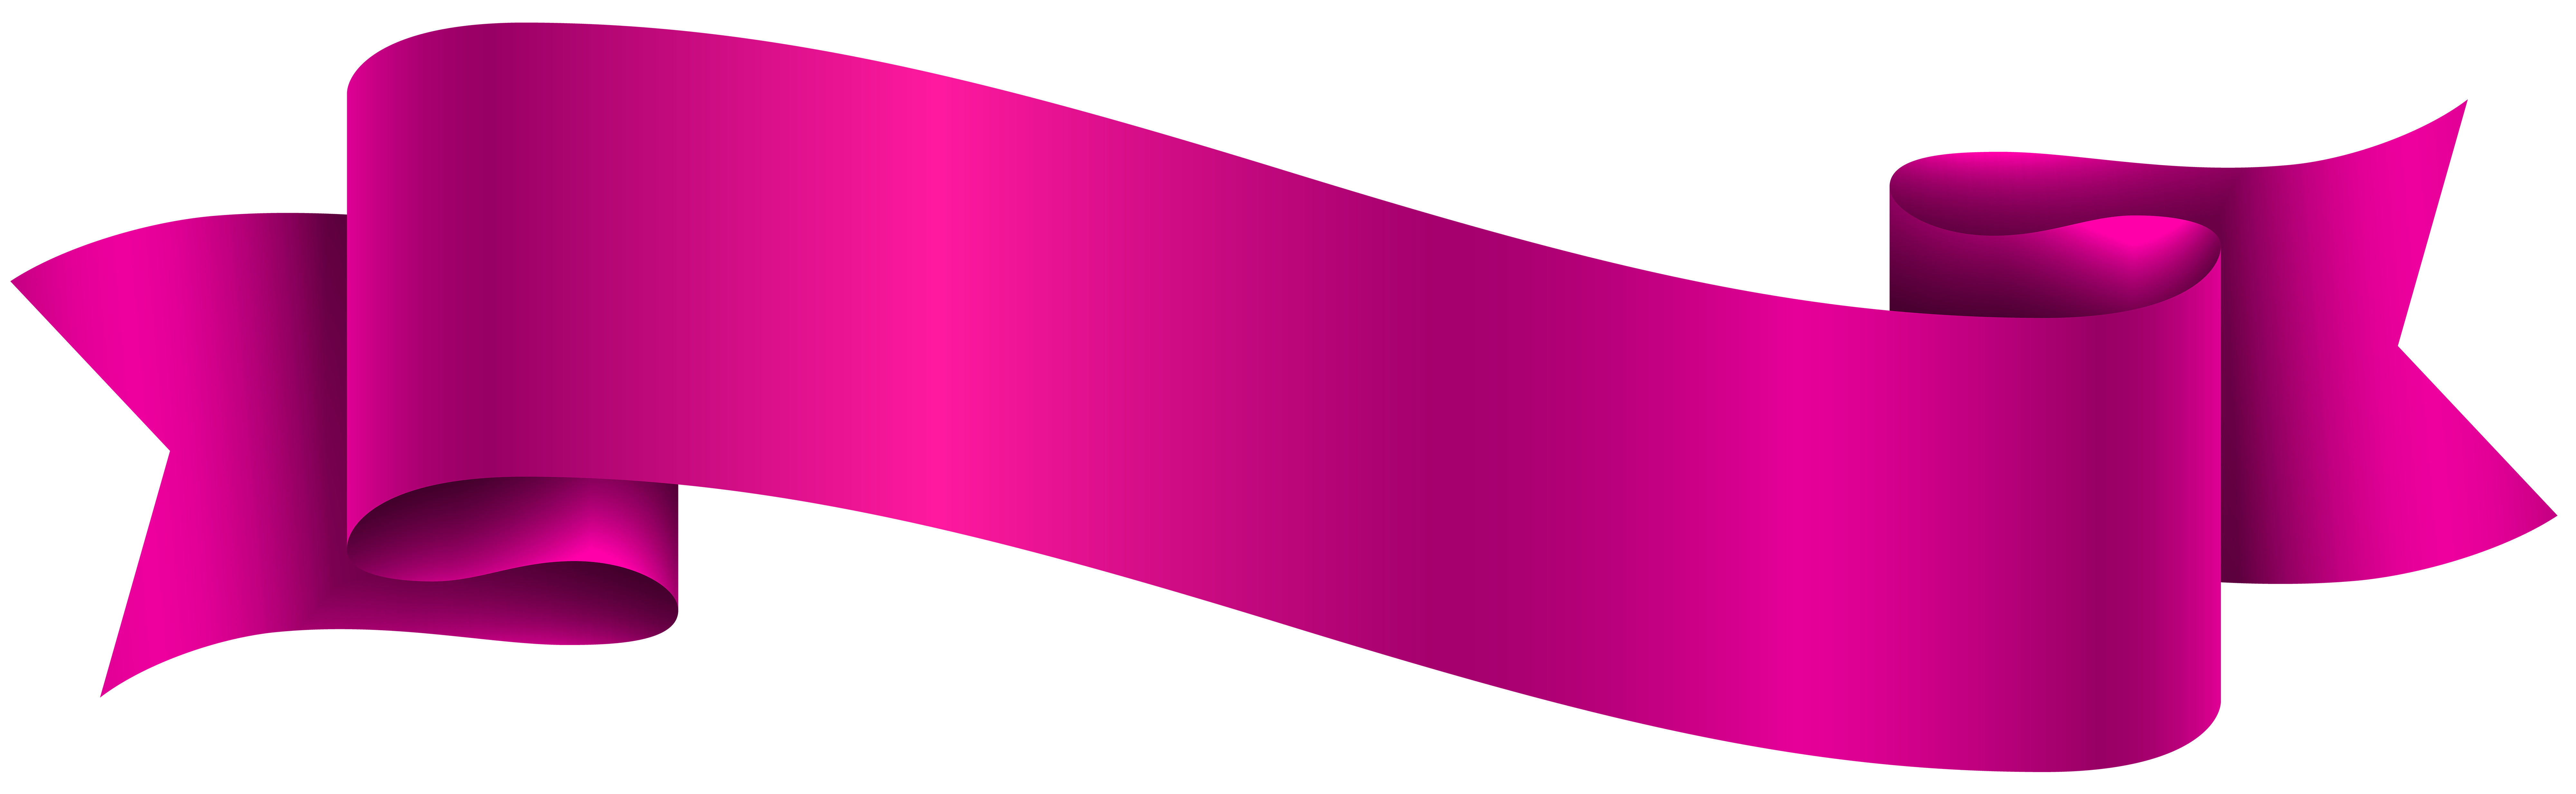 Pink Banner Png Image With Transparent Background Png Arts Images and